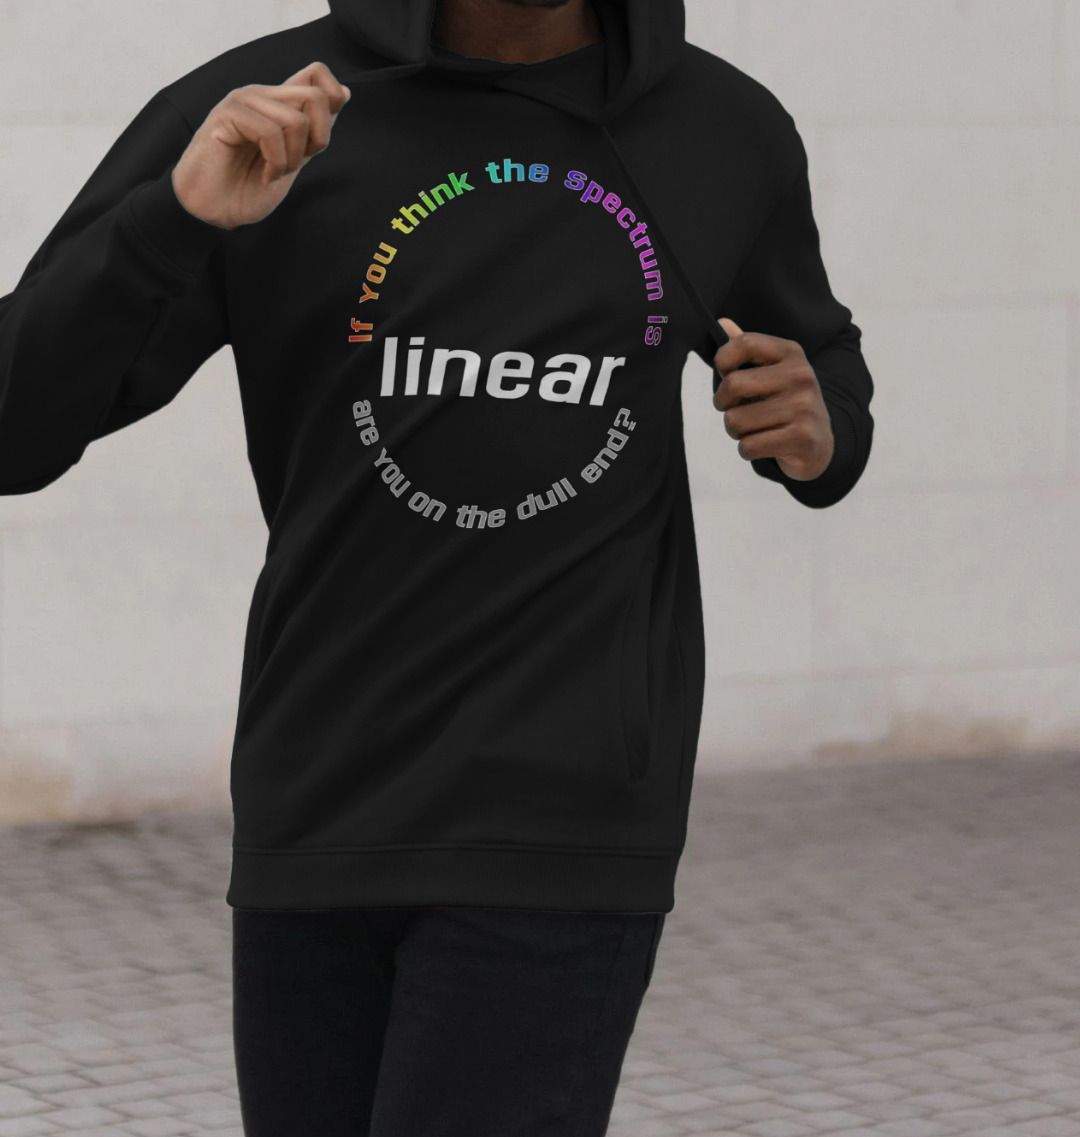 If You Think The Spectrum Is Linear unisex hoodie